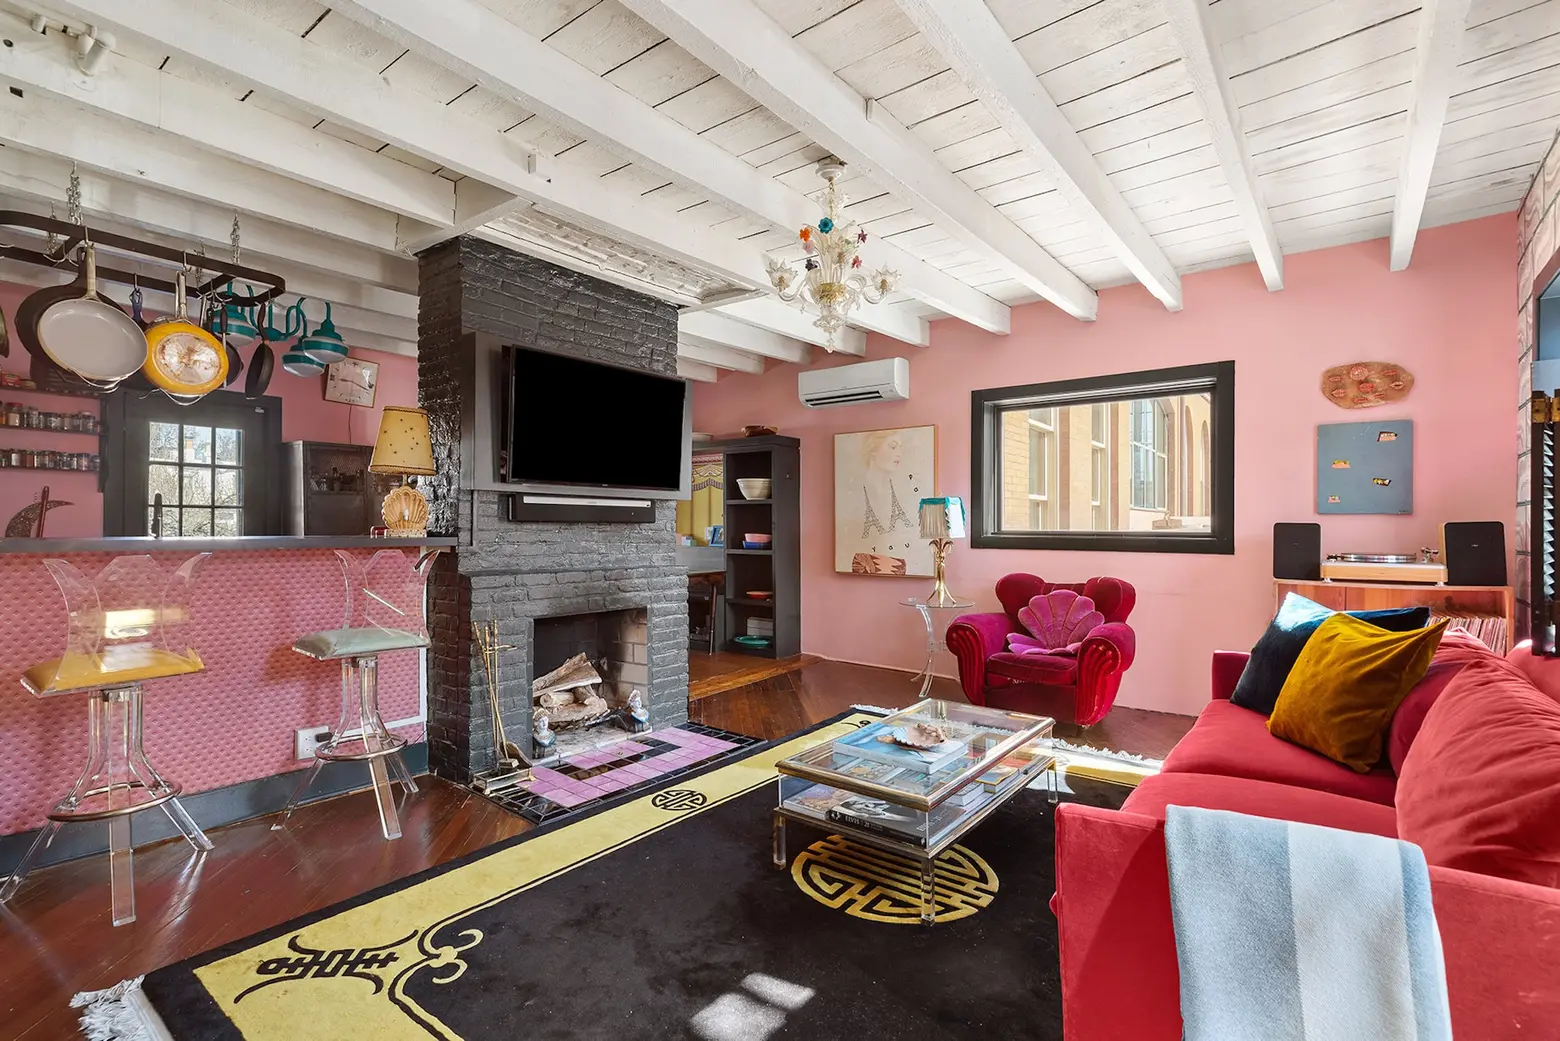 This $2.7M Red Hook home brings color and creativity to townhouse living